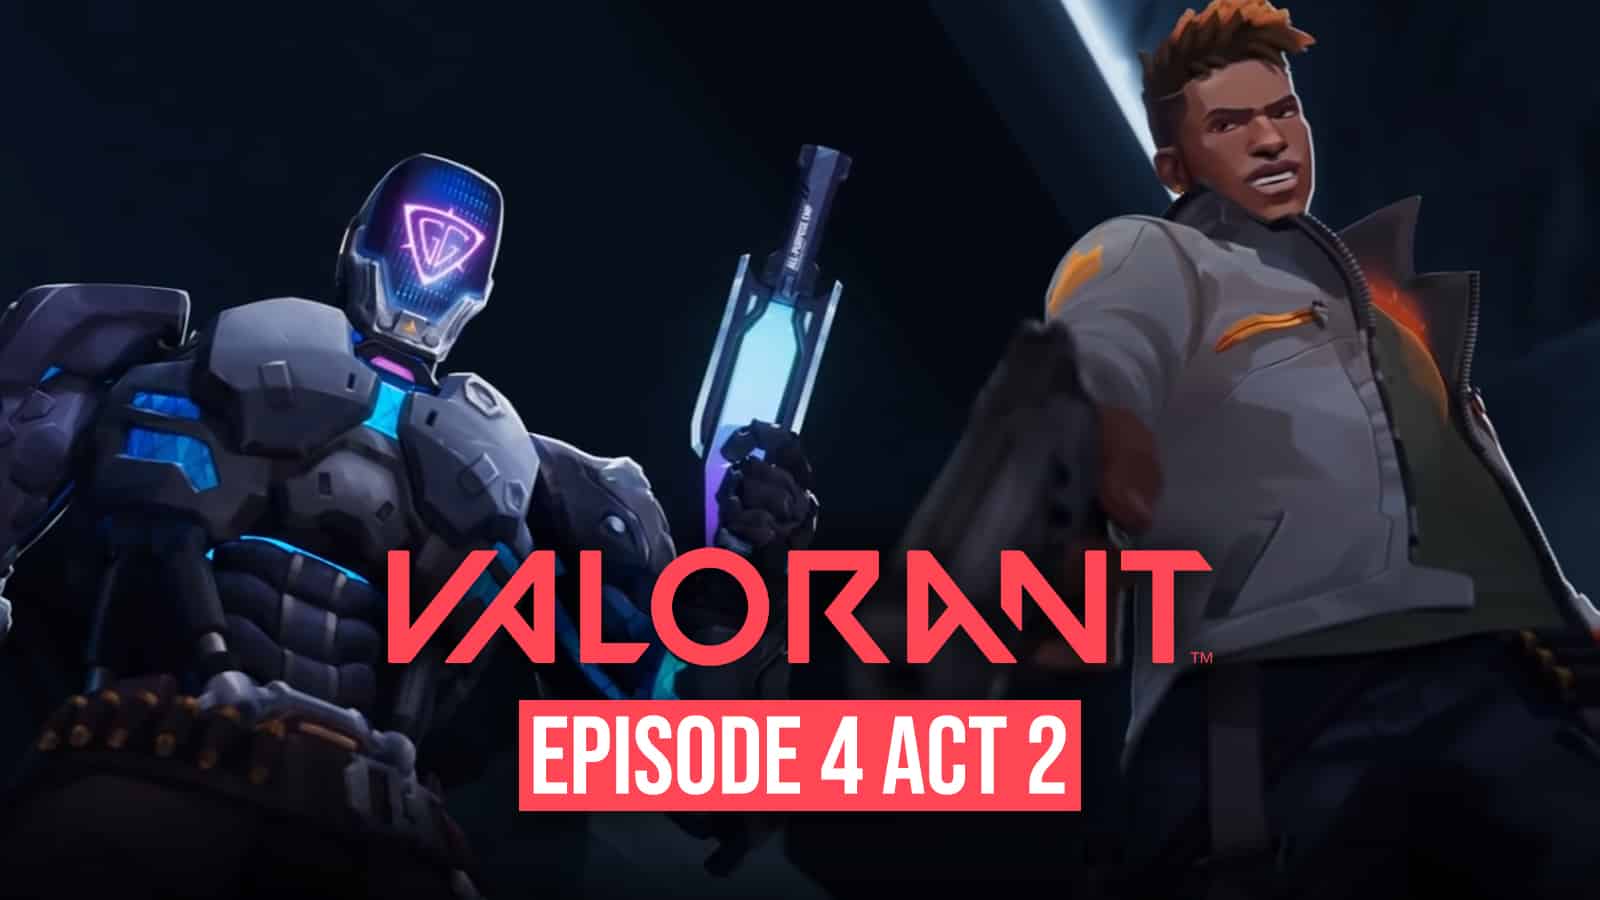 Valorant Episode 2 Act 3 will have a new, more open map called